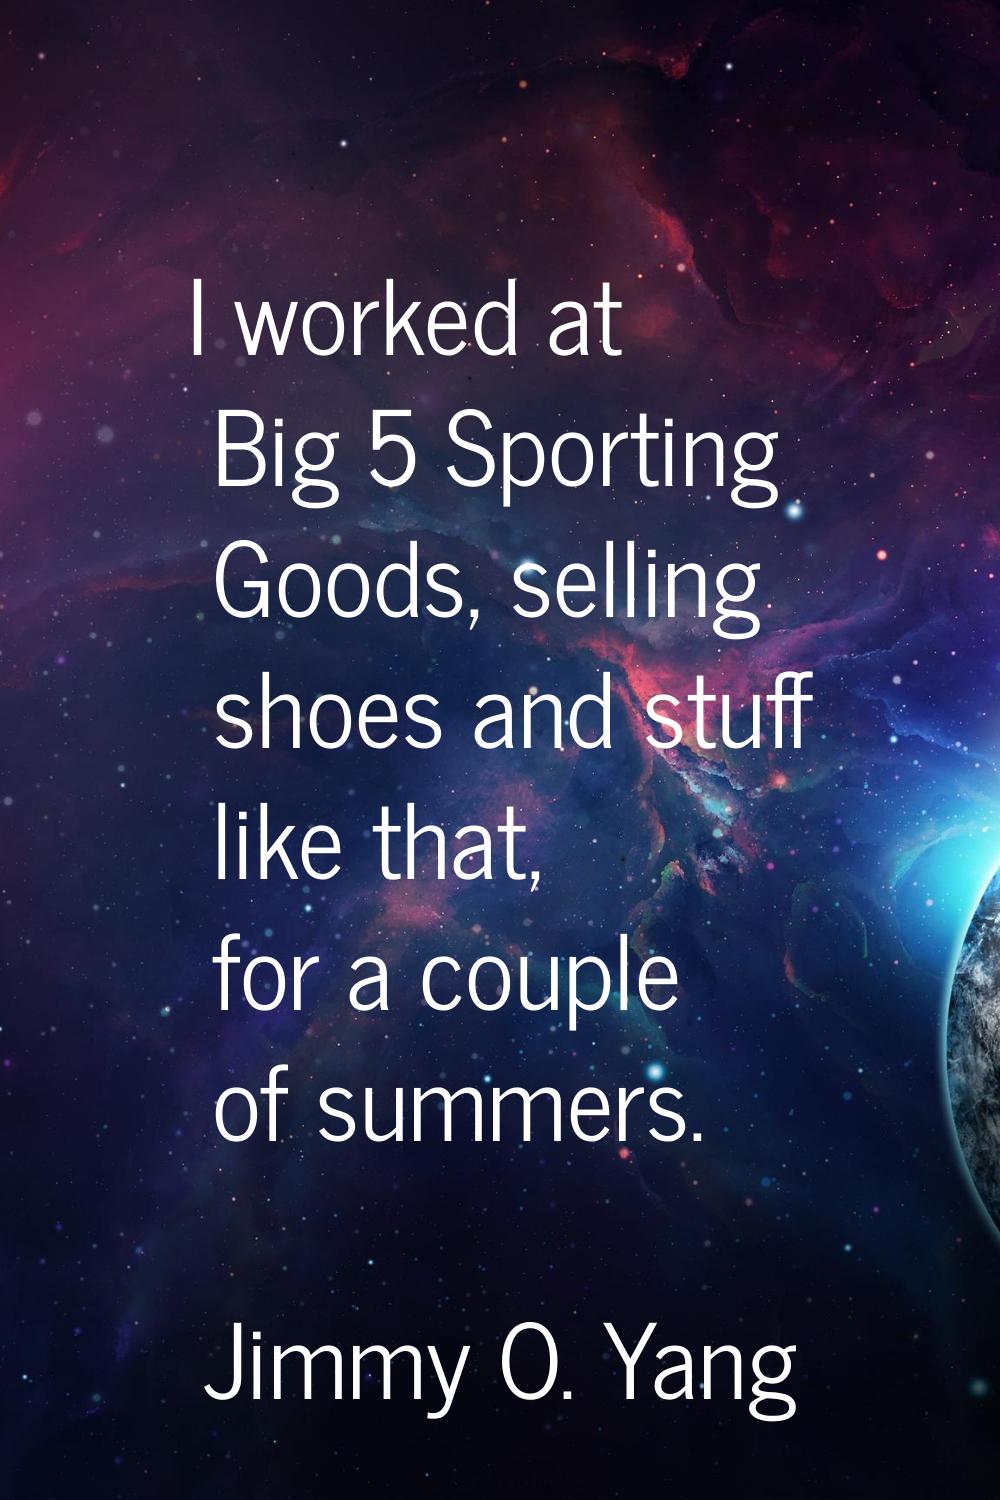 I worked at Big 5 Sporting Goods, selling shoes and stuff like that, for a couple of summers.